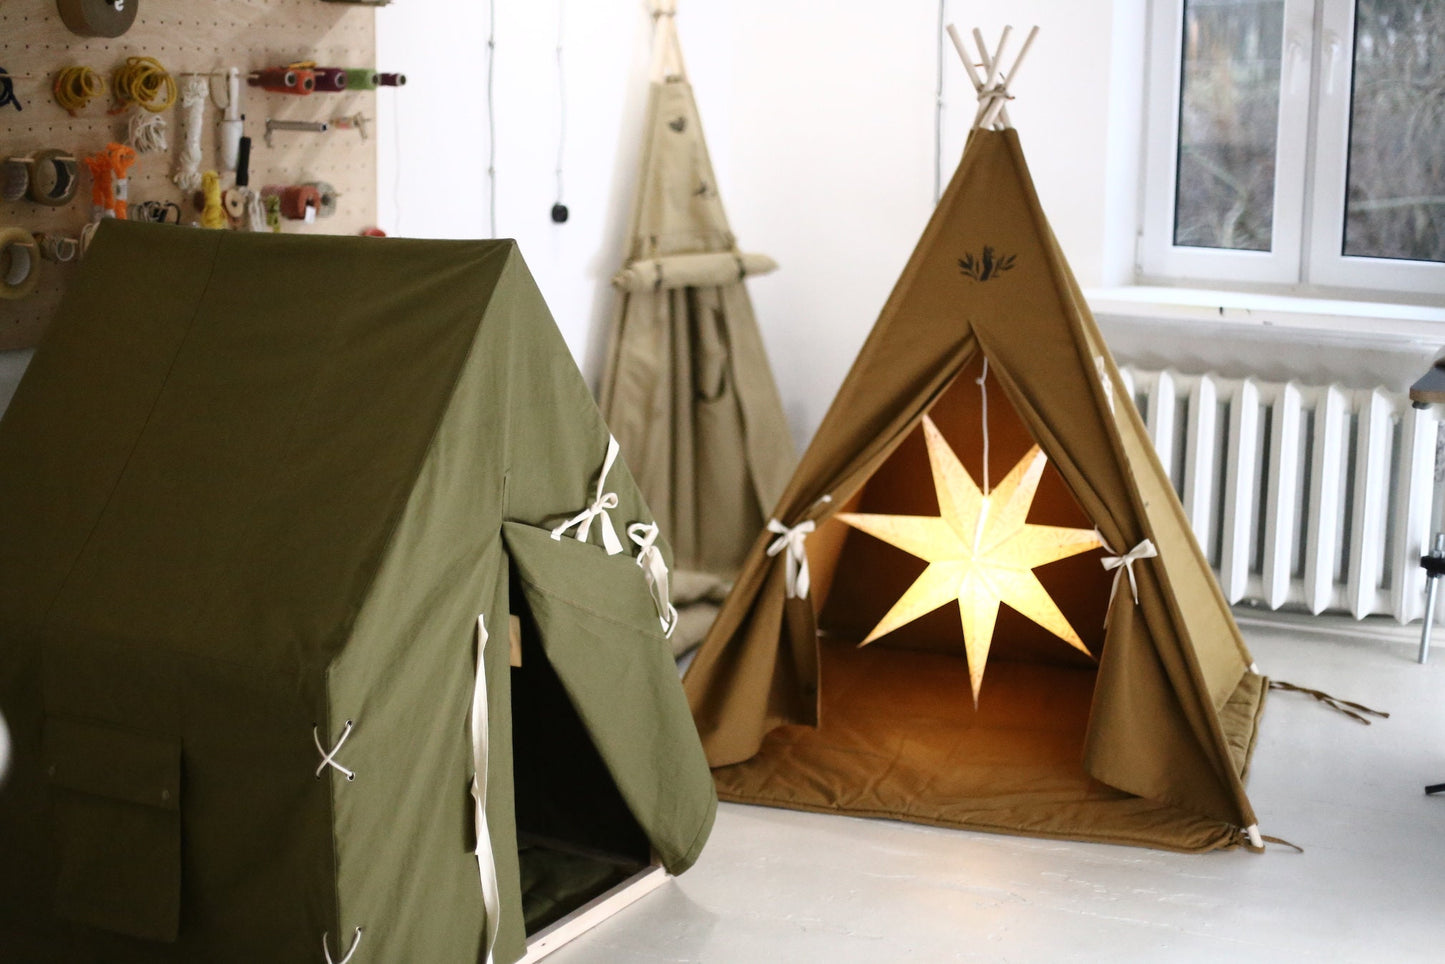 Girls Play House  ||  Boys Tent  ||  Indoor Castle Playhouse  ||  Kids Tent With Lights  ||  Tarp Tipi  ||  Girls Play Teepee first birthday